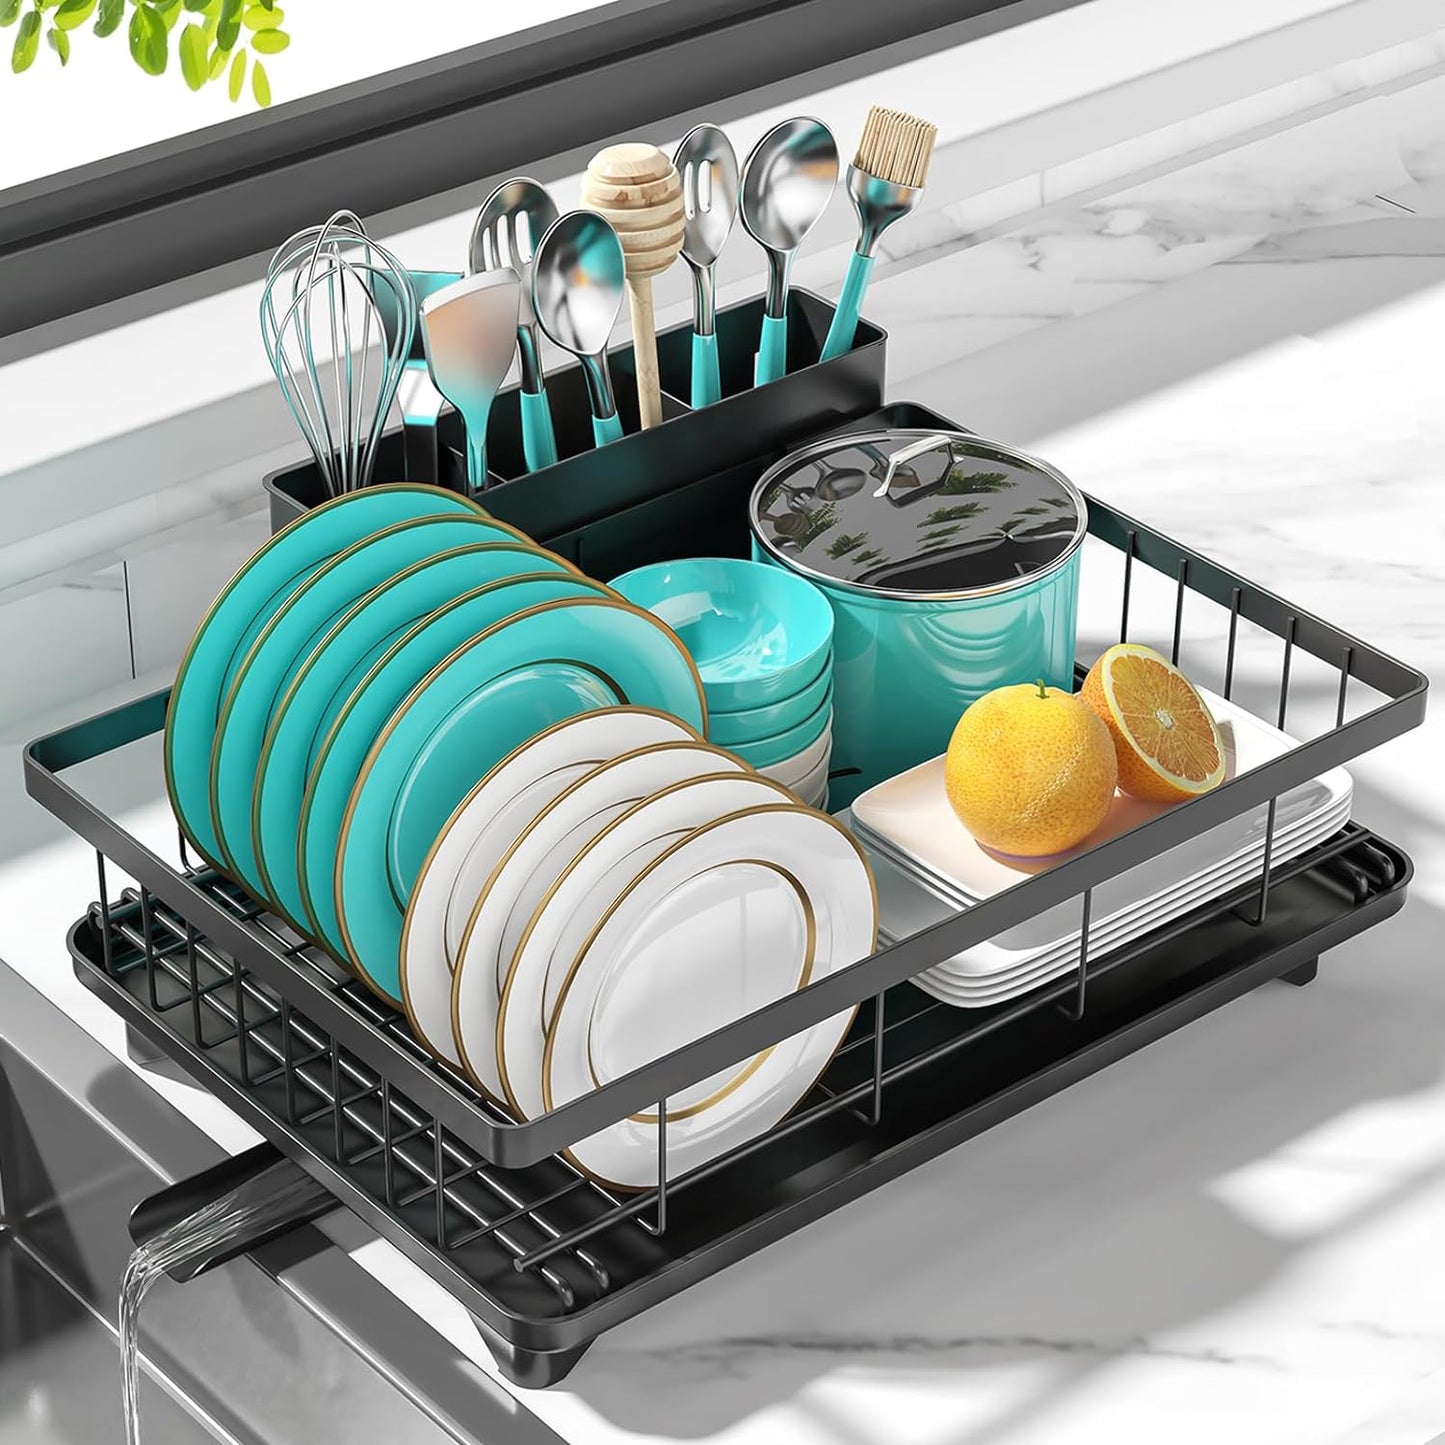 New Dish Drying Rack with Sloped Drainboard Space-Saving Dish Rack for Kitchen Counter with Wide Leak-Proof Spout, Dish Drainer Rack with Large 3-Compartment Utensil Holder for Various Tableware